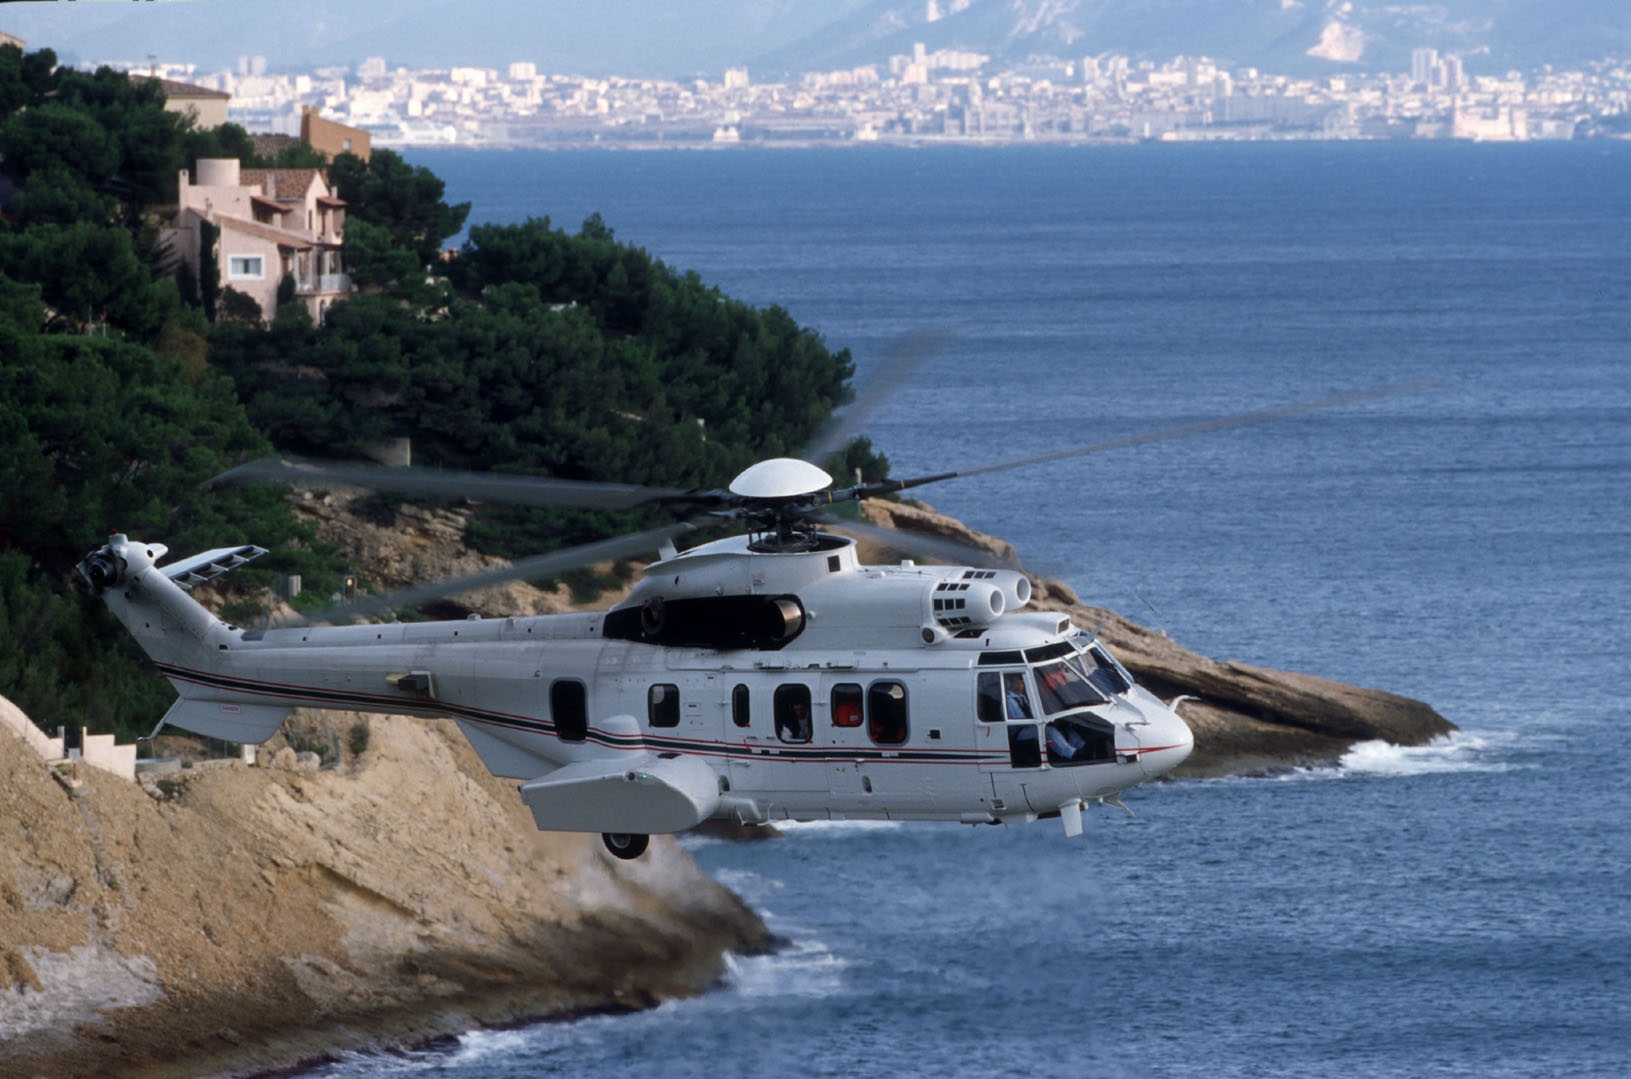 More bad news for Airbus Super Puma family. Airbus Helicopters